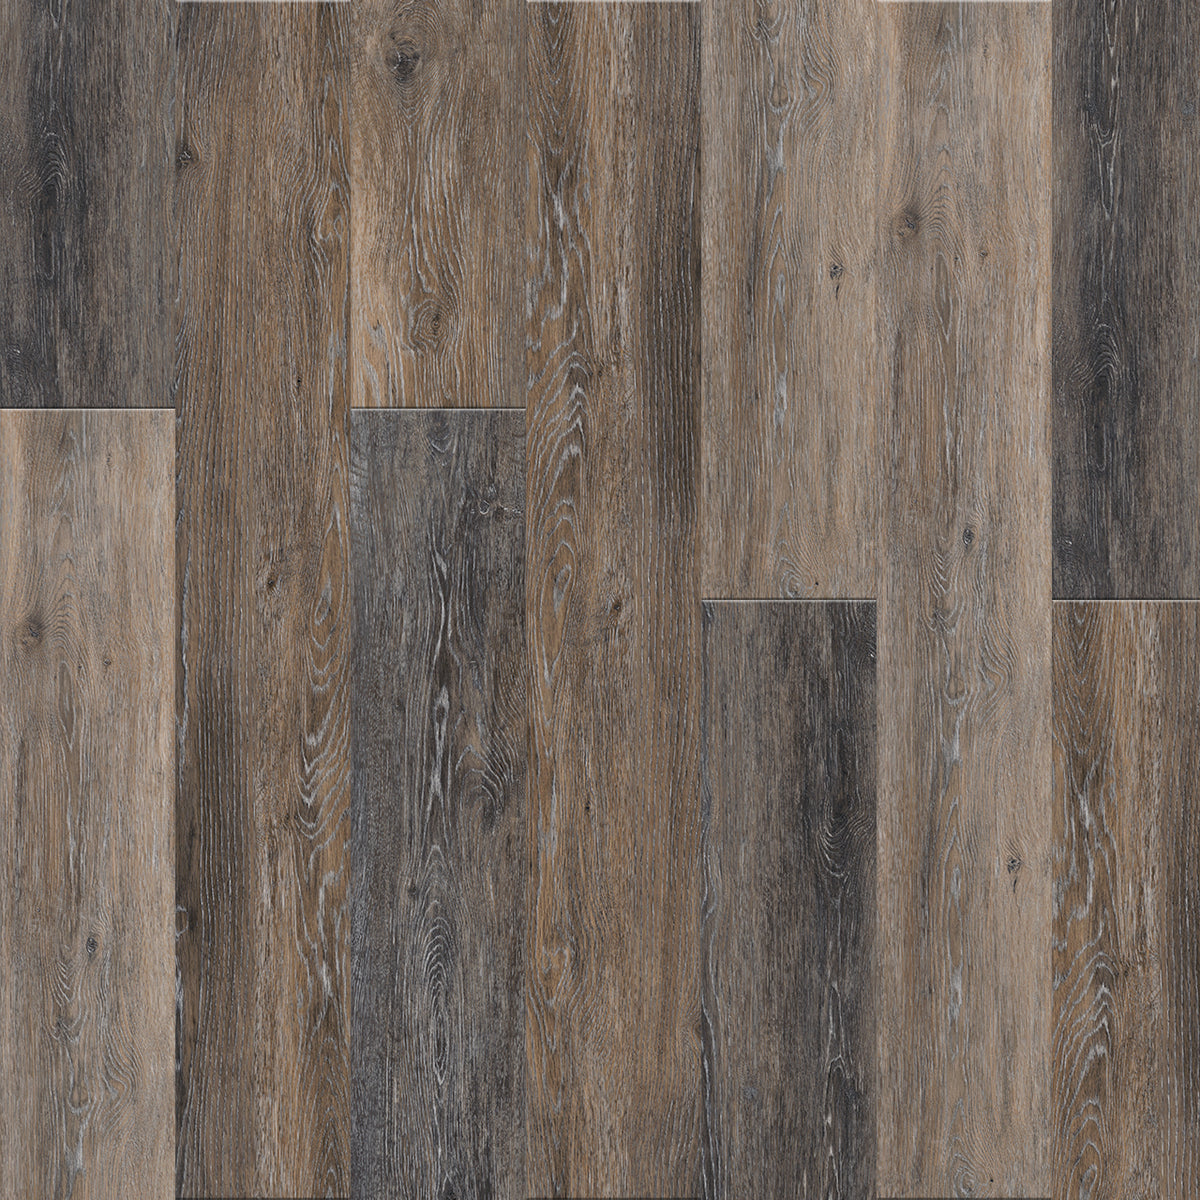 Engineered Floors - Triumph Collection - Renewal - 7 in. x 48 in. - Mesa Verde